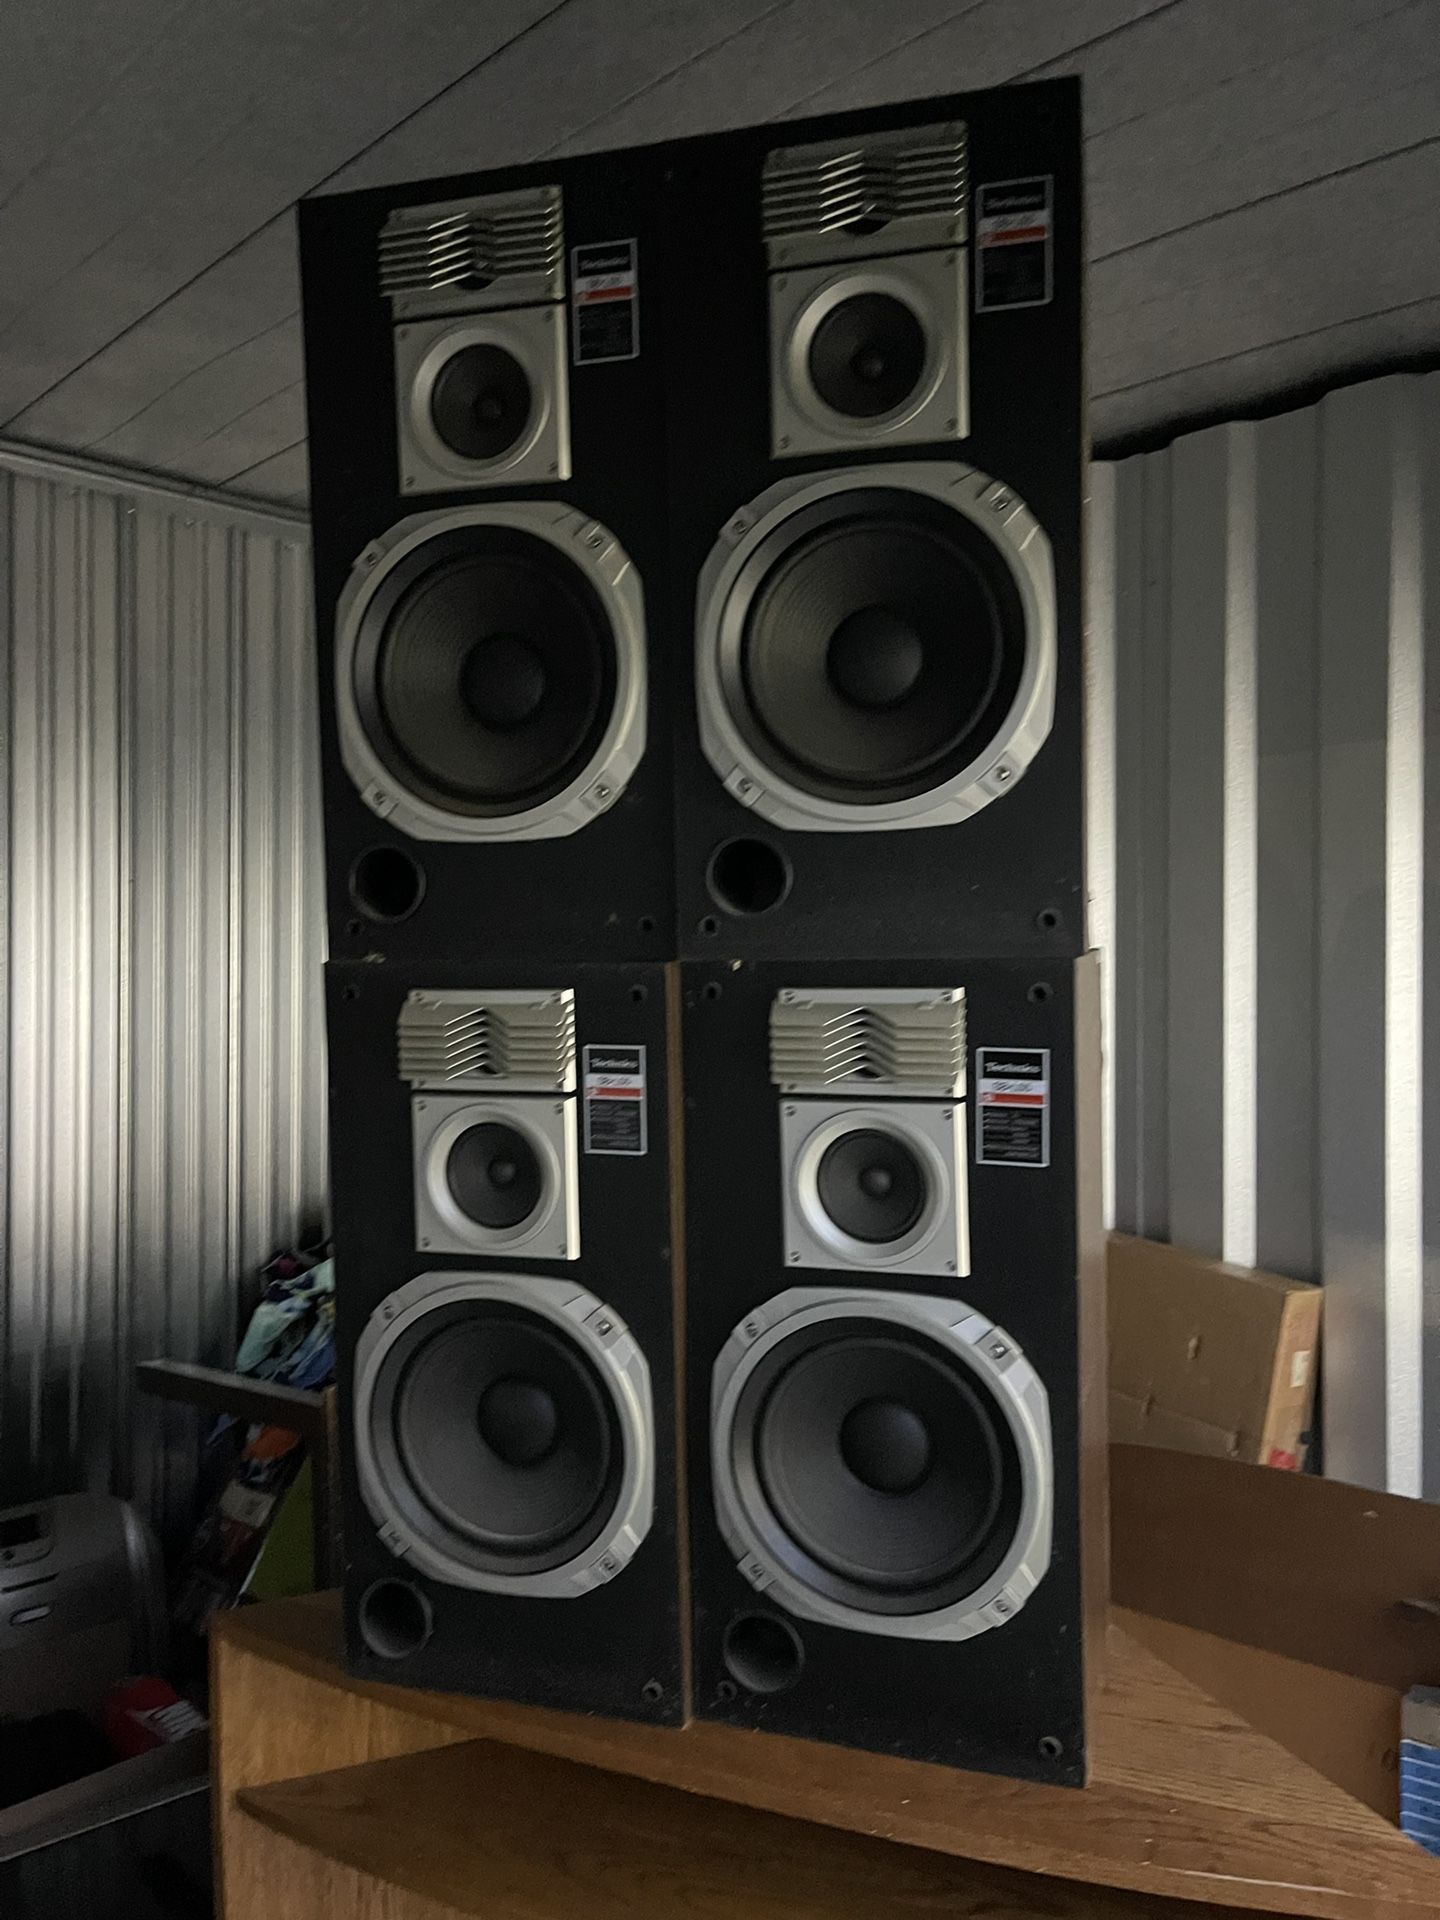 4 Technics Speakers With Covers. Model In Picture  